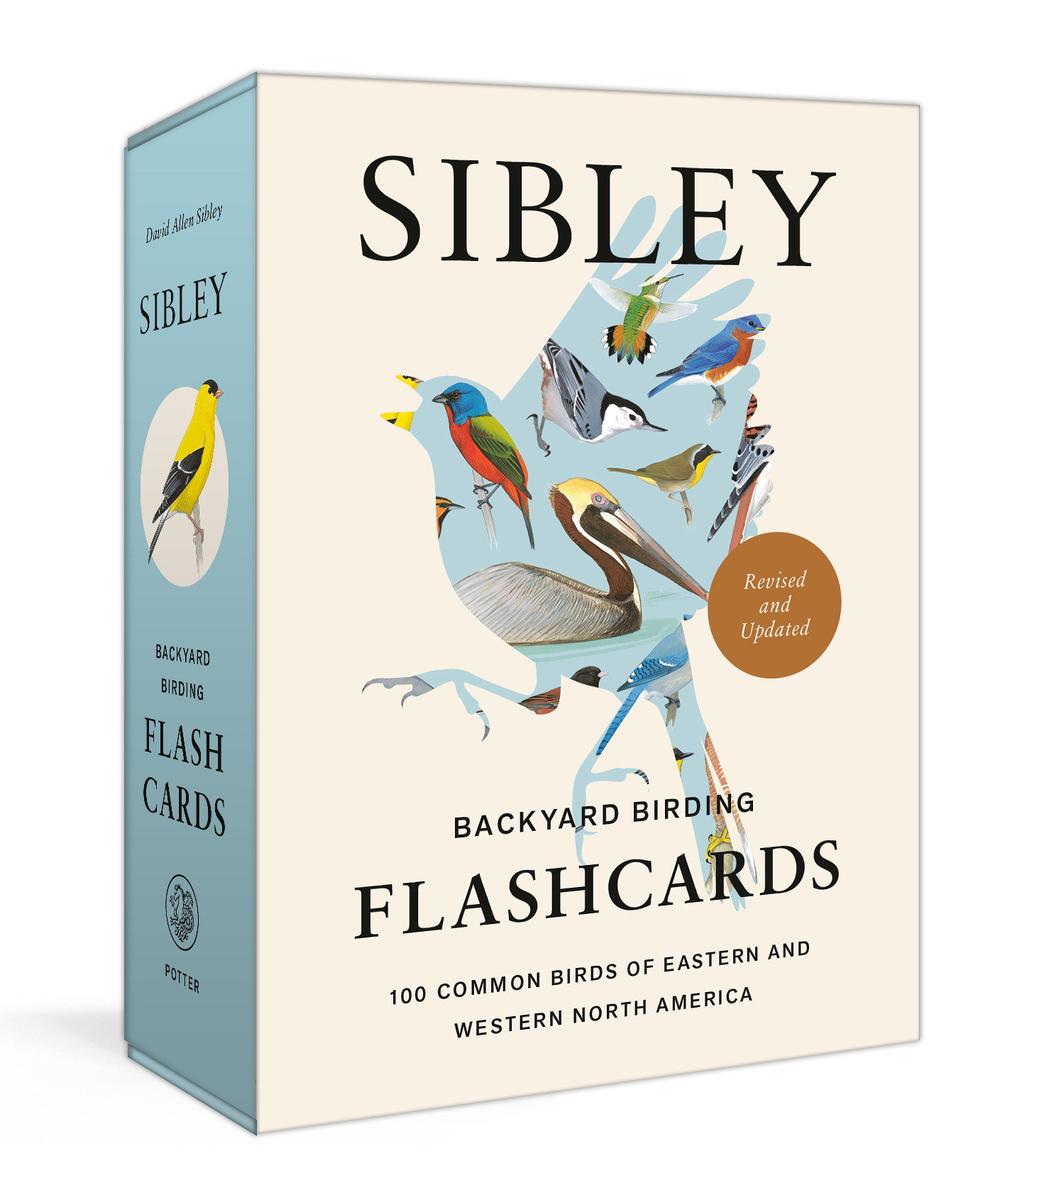 Sibley Backyard Birding Flashcards: Revised and Updated